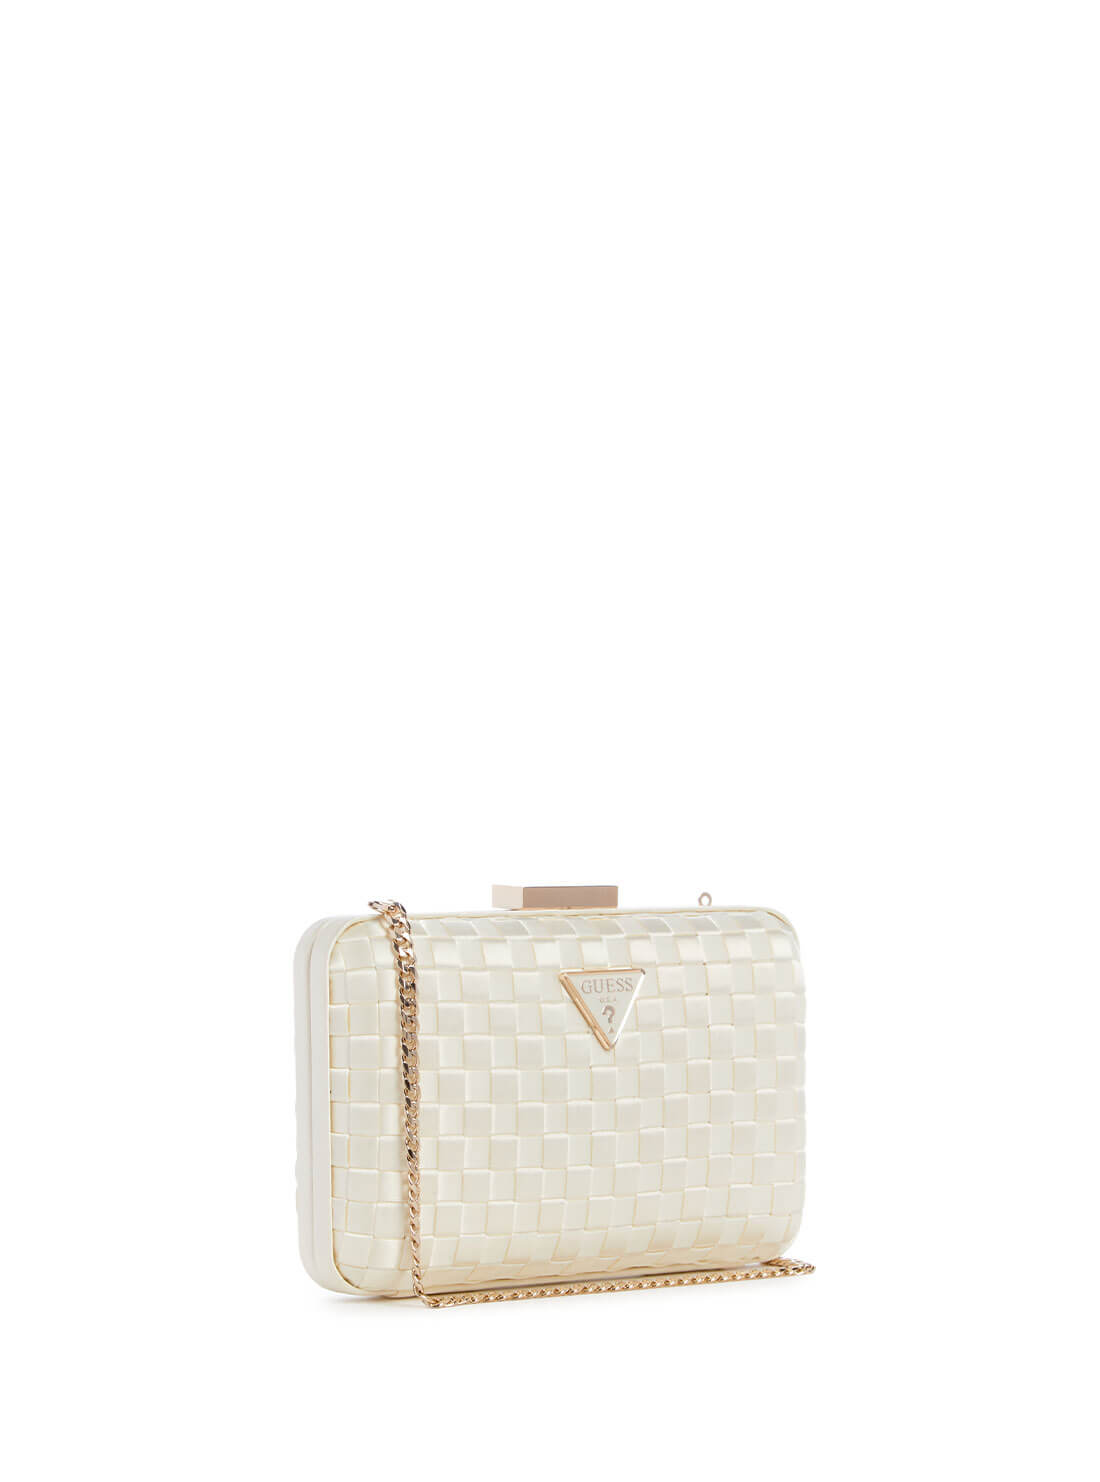 GUESS White Twiller Minaudiere Clutch Bag side view